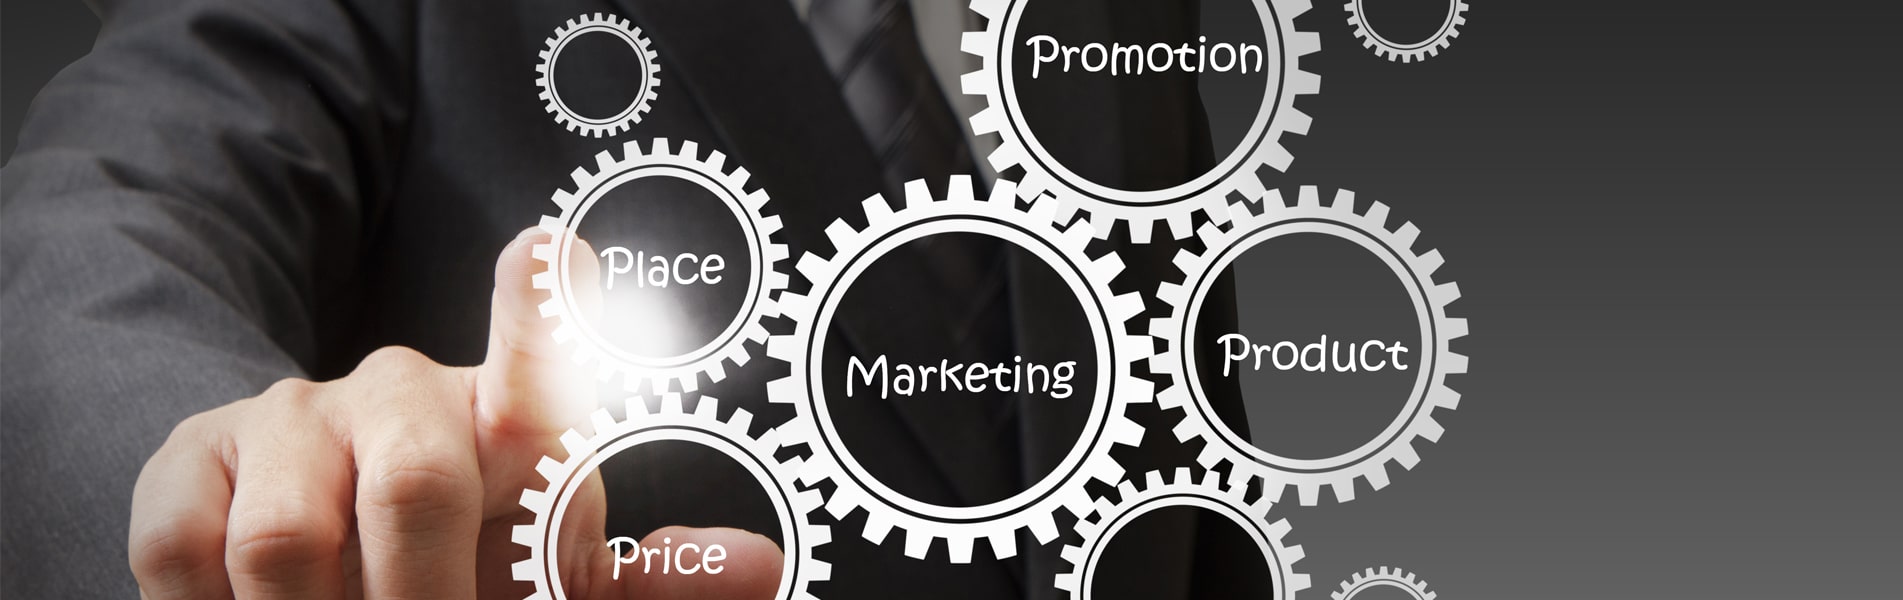 3 Steps to Align Your Sales and Marketing Process | Strategix